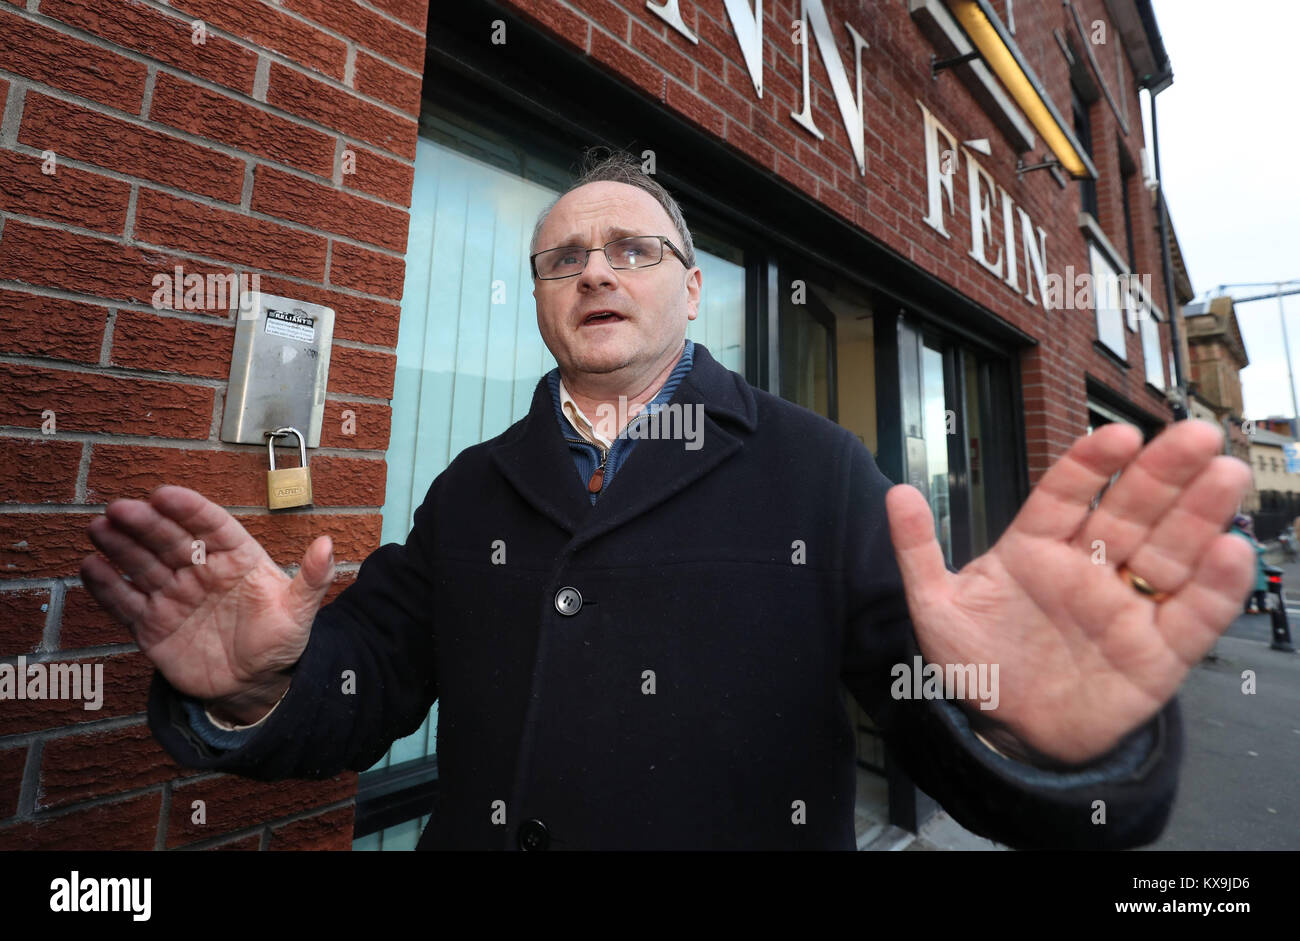 West Tyrone MP Barry McElduff leaving Sinn Fein's headquarters on the Falls Road in Belfast following his suspension from all party activity for three months after he posted a social media video of him with a loaf of Kingsmill bread on his head on the anniversary of the Kingsmill massacre. Stock Photo